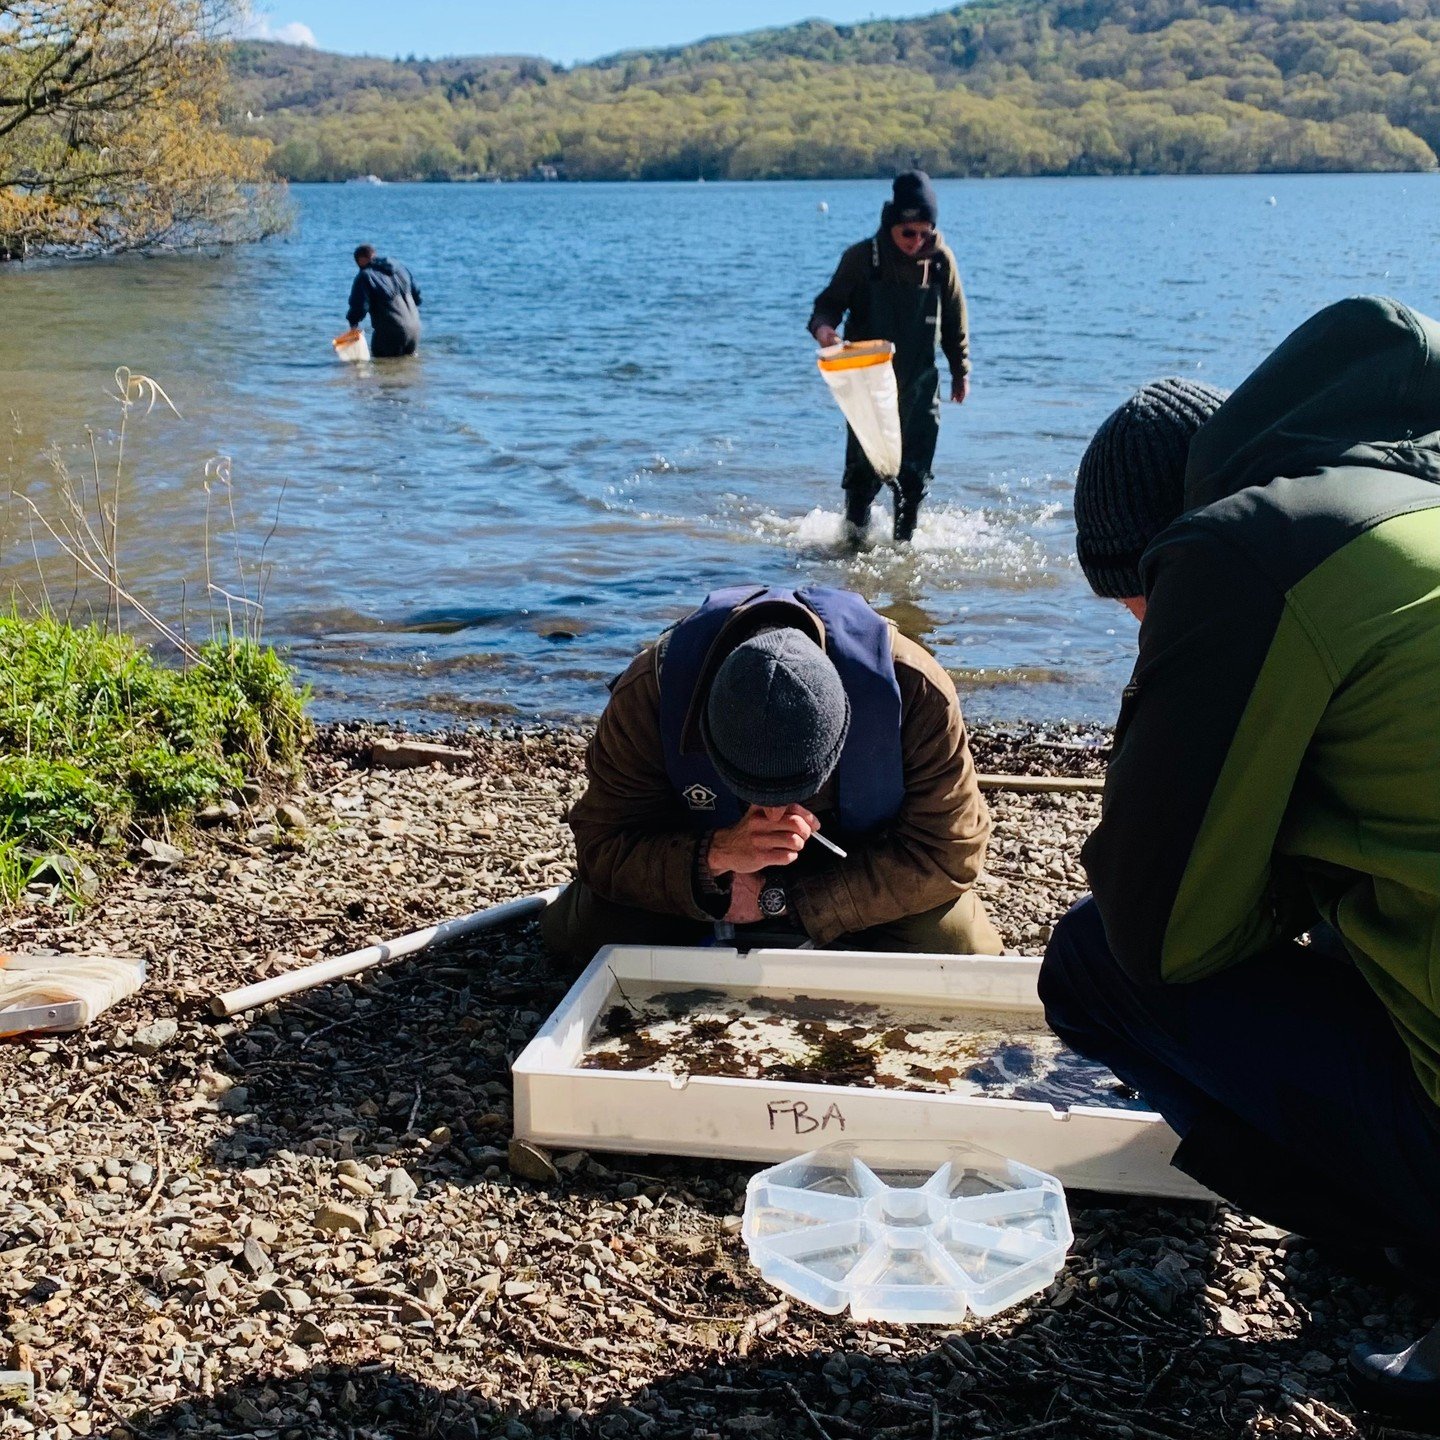 A beautiful day for some bankside sorting after kick sampling in Windermere as part of the @freshwaterbiological Sampling and Identifying Freshwater Invertebrates course last week led by John Davy-Bowker.

The next collection and identification cours